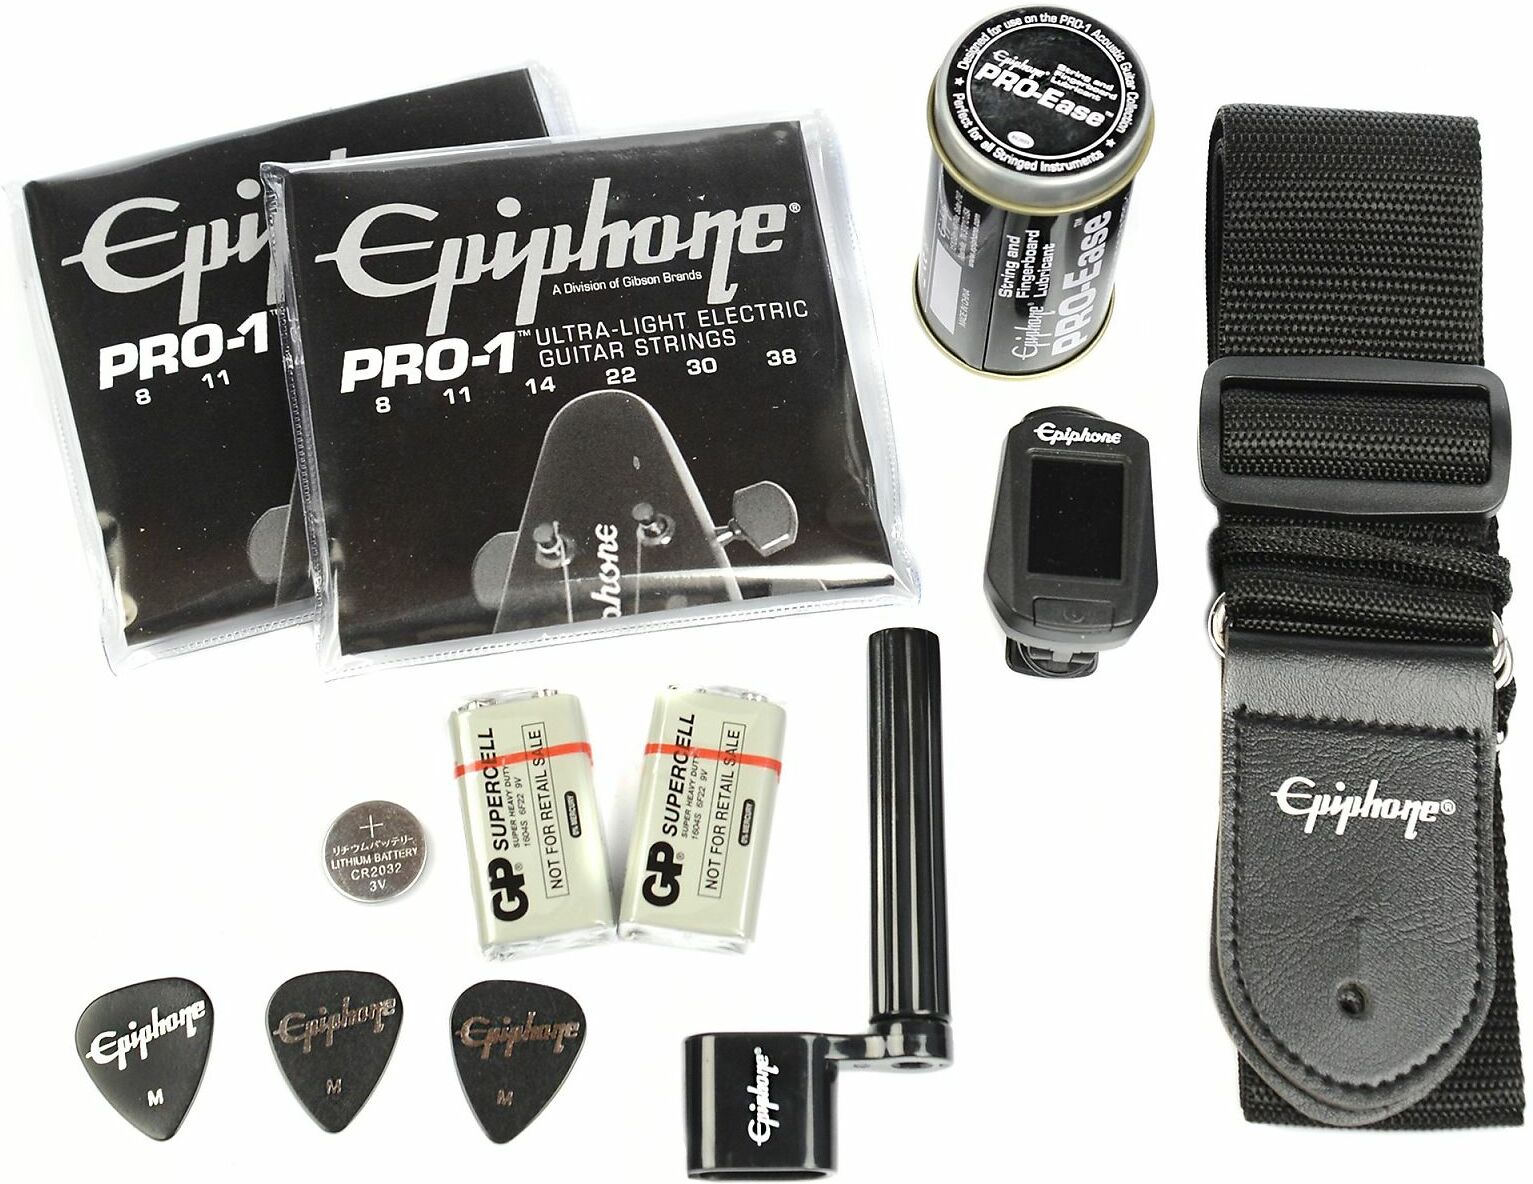 Epiphone Pro-1 Accessory Kit For Electric - Guitar tool kit - Main picture